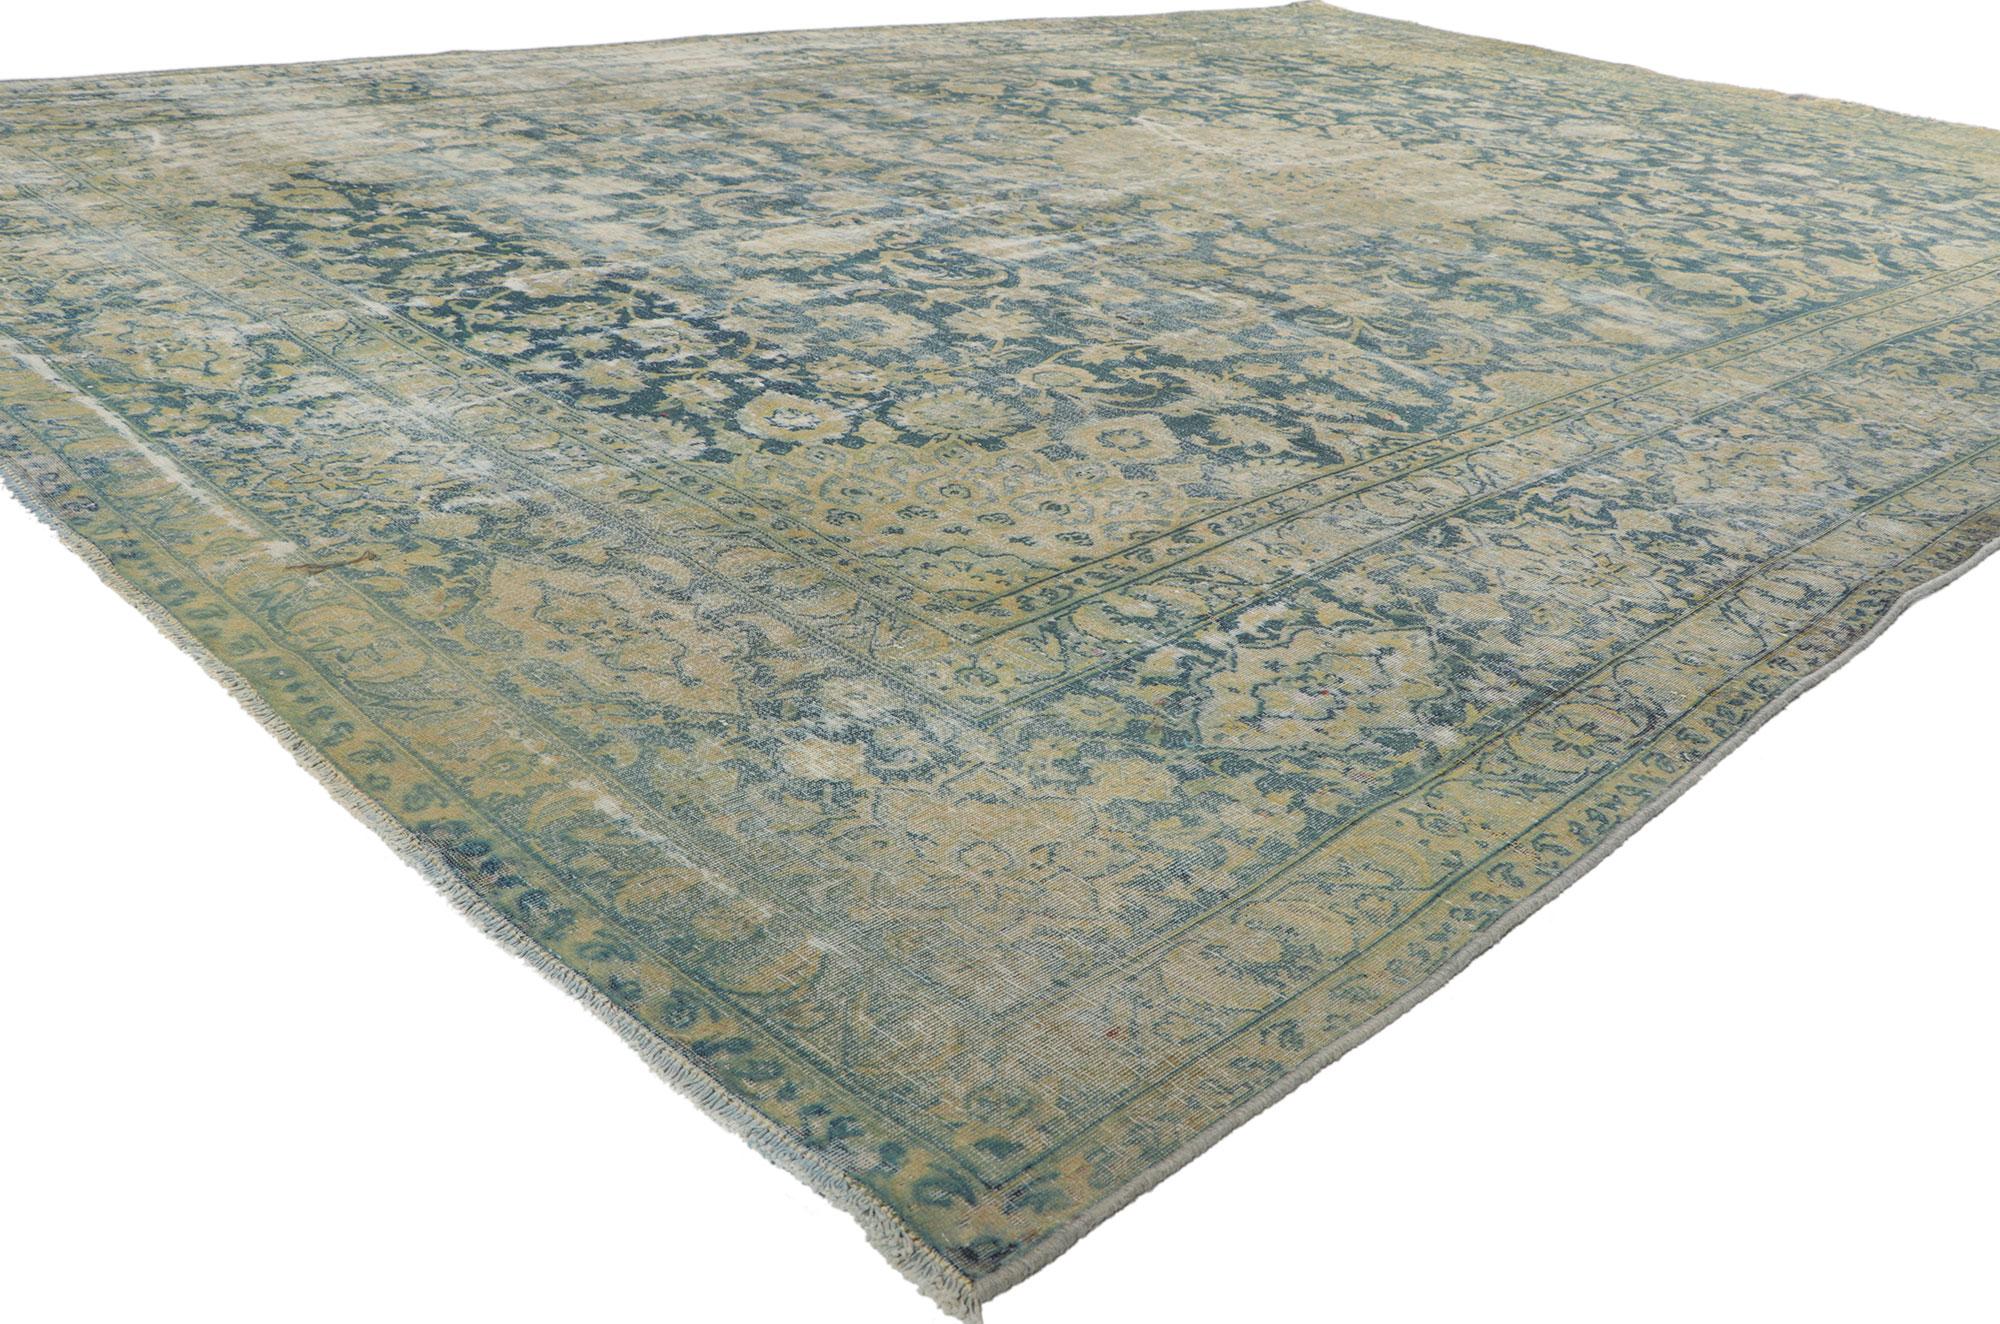 76820 Antique Persian Kerman Rug, 9'03 x 13'03. Brimming with casual elegance, incredible detail and texture, this hand knotted wool antique Persian Kerman rug is a captivating vision of woven beauty. The intricate botanical design and sophisticated